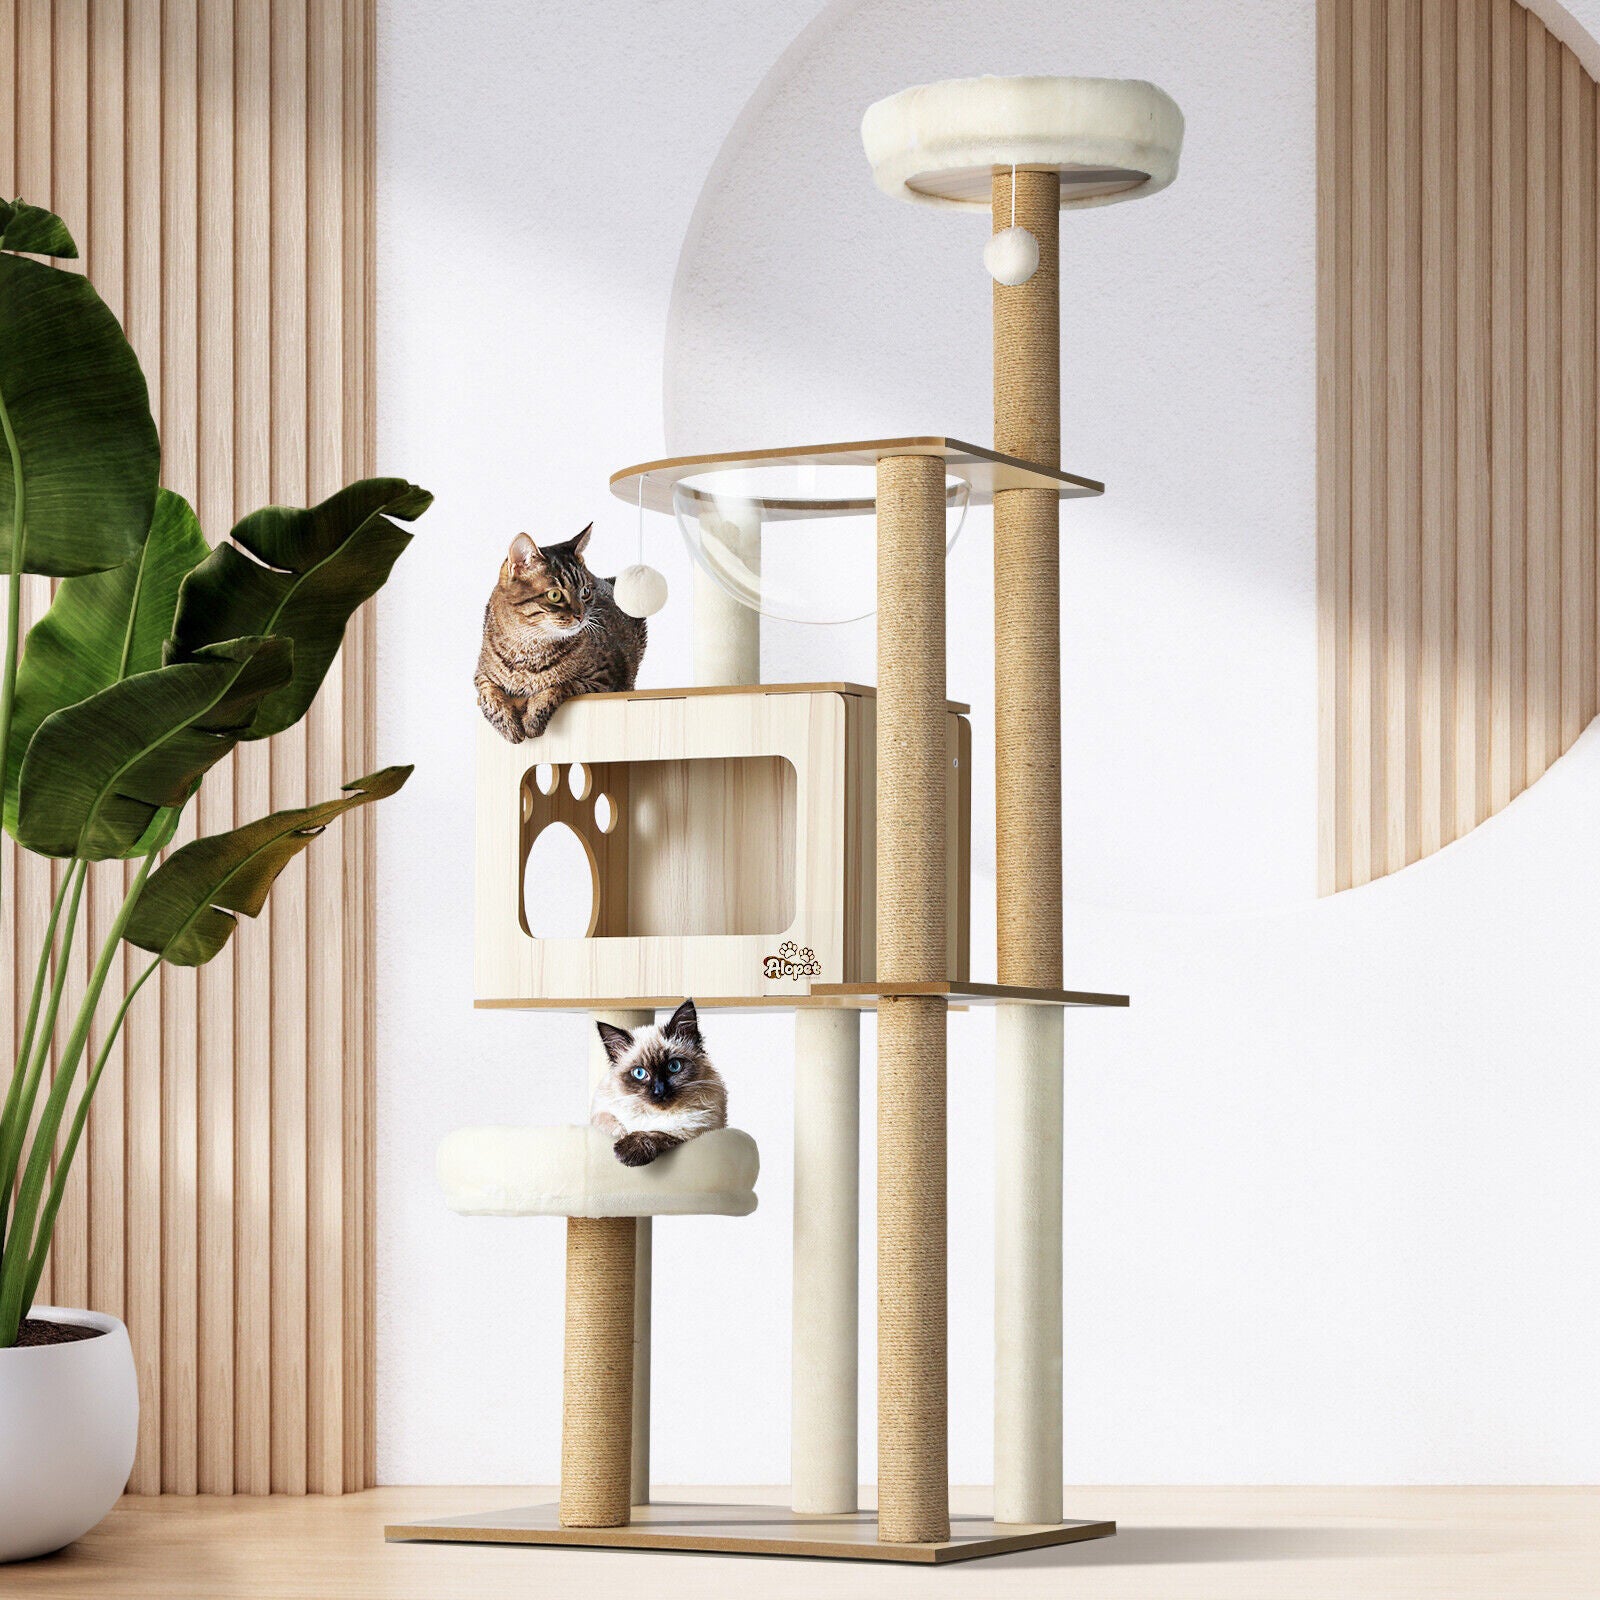 142cm Cat Tree Tower Scratching Post Scratcher Cats Condo House Bed Furniture